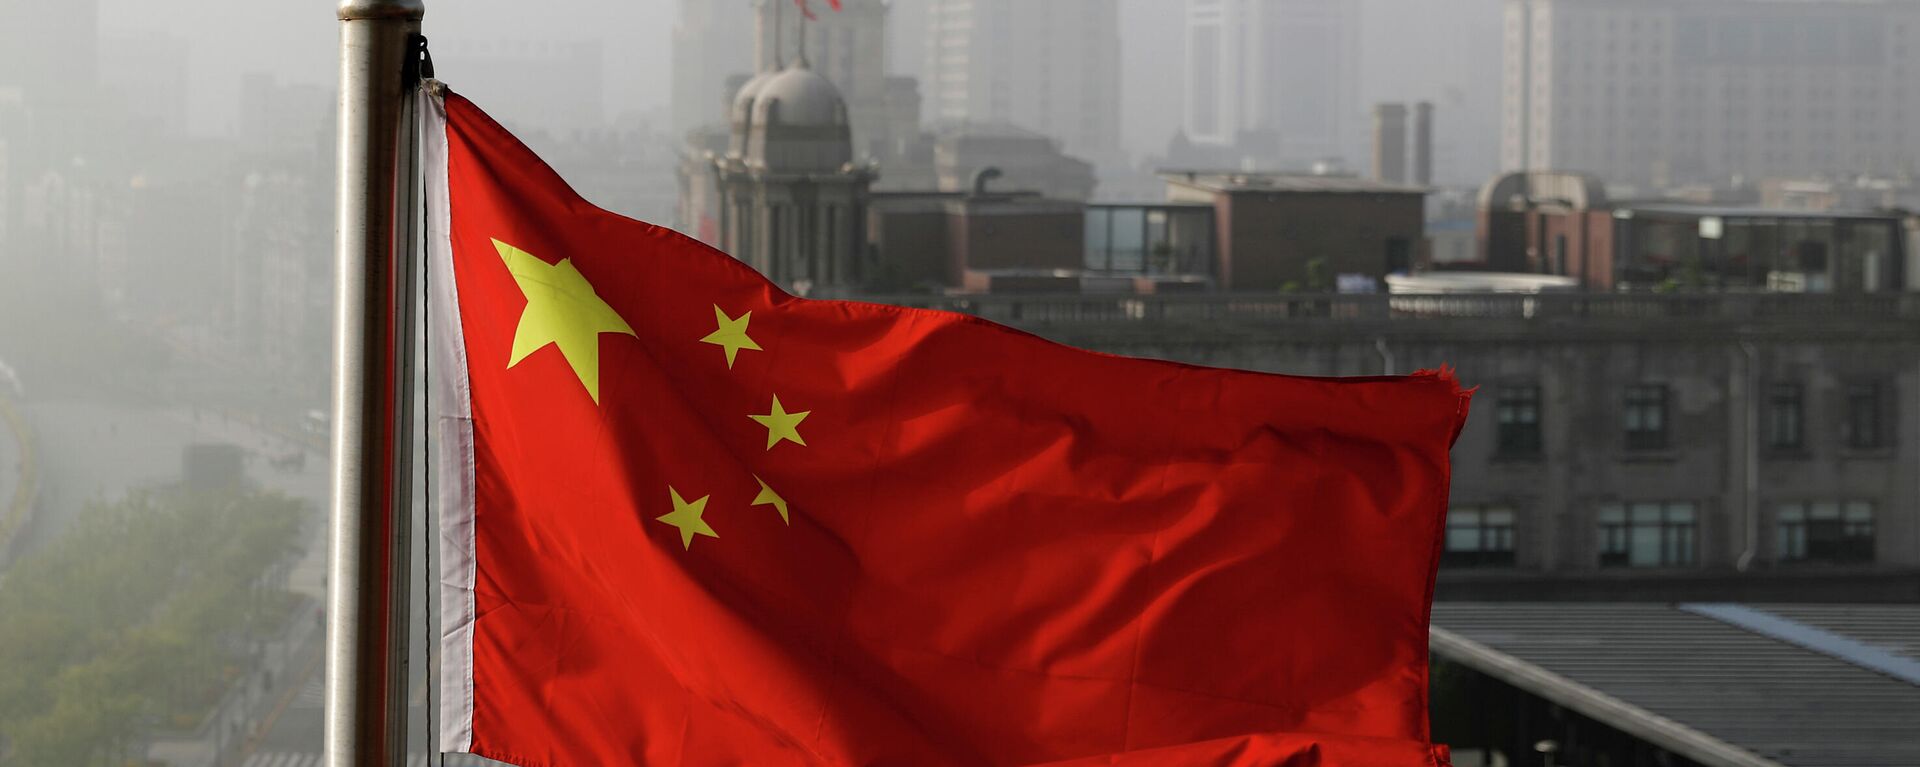 In this April 14, 2016 file photo, a Chinese national flag flutters against the office buildings in Shanghai, China.  - Sputnik International, 1920, 03.08.2022